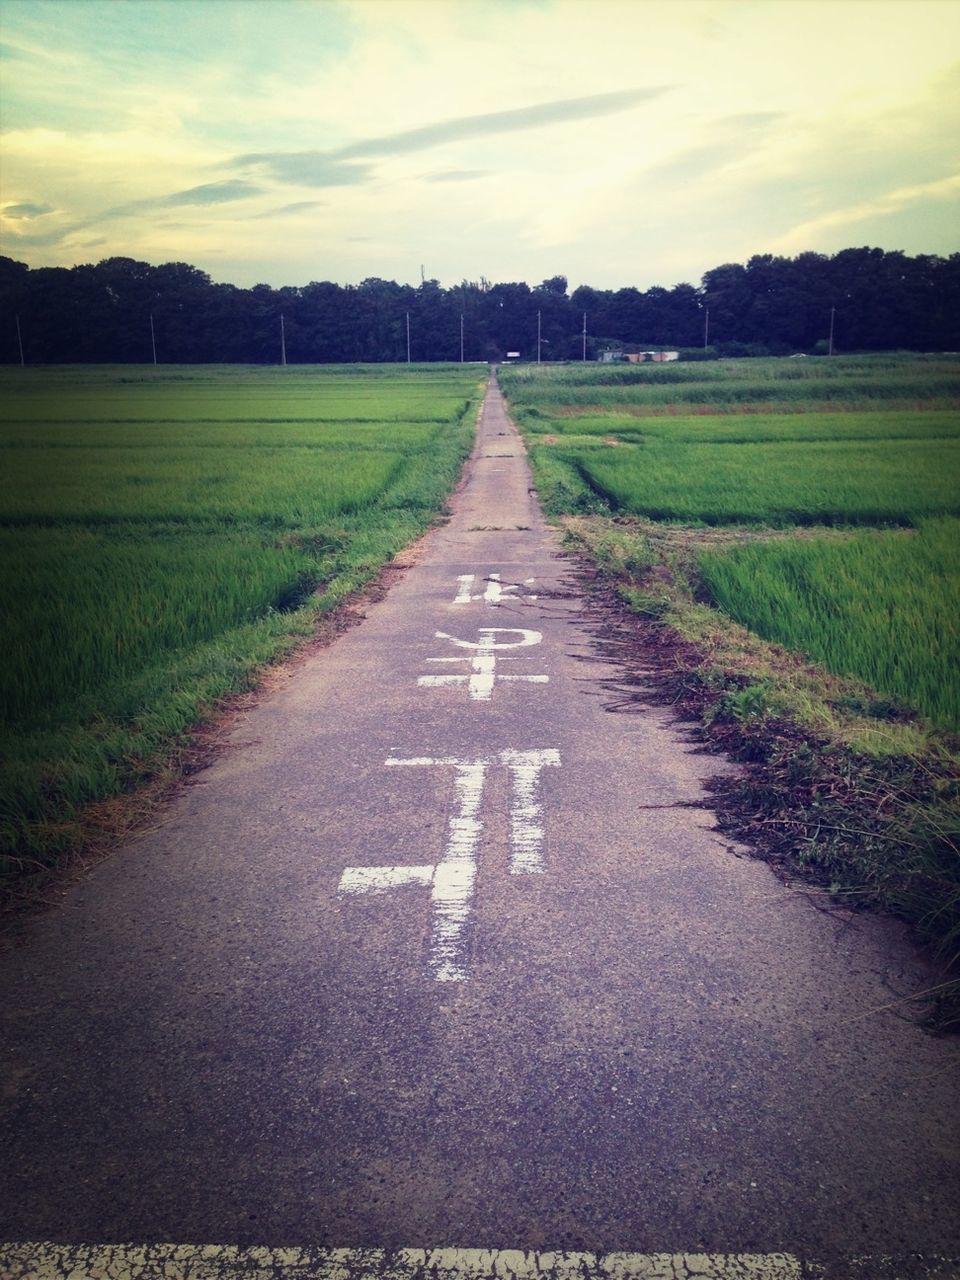 the way forward, diminishing perspective, road, vanishing point, road marking, transportation, country road, grass, asphalt, sky, landscape, empty road, field, tranquility, tranquil scene, long, empty, nature, direction, street